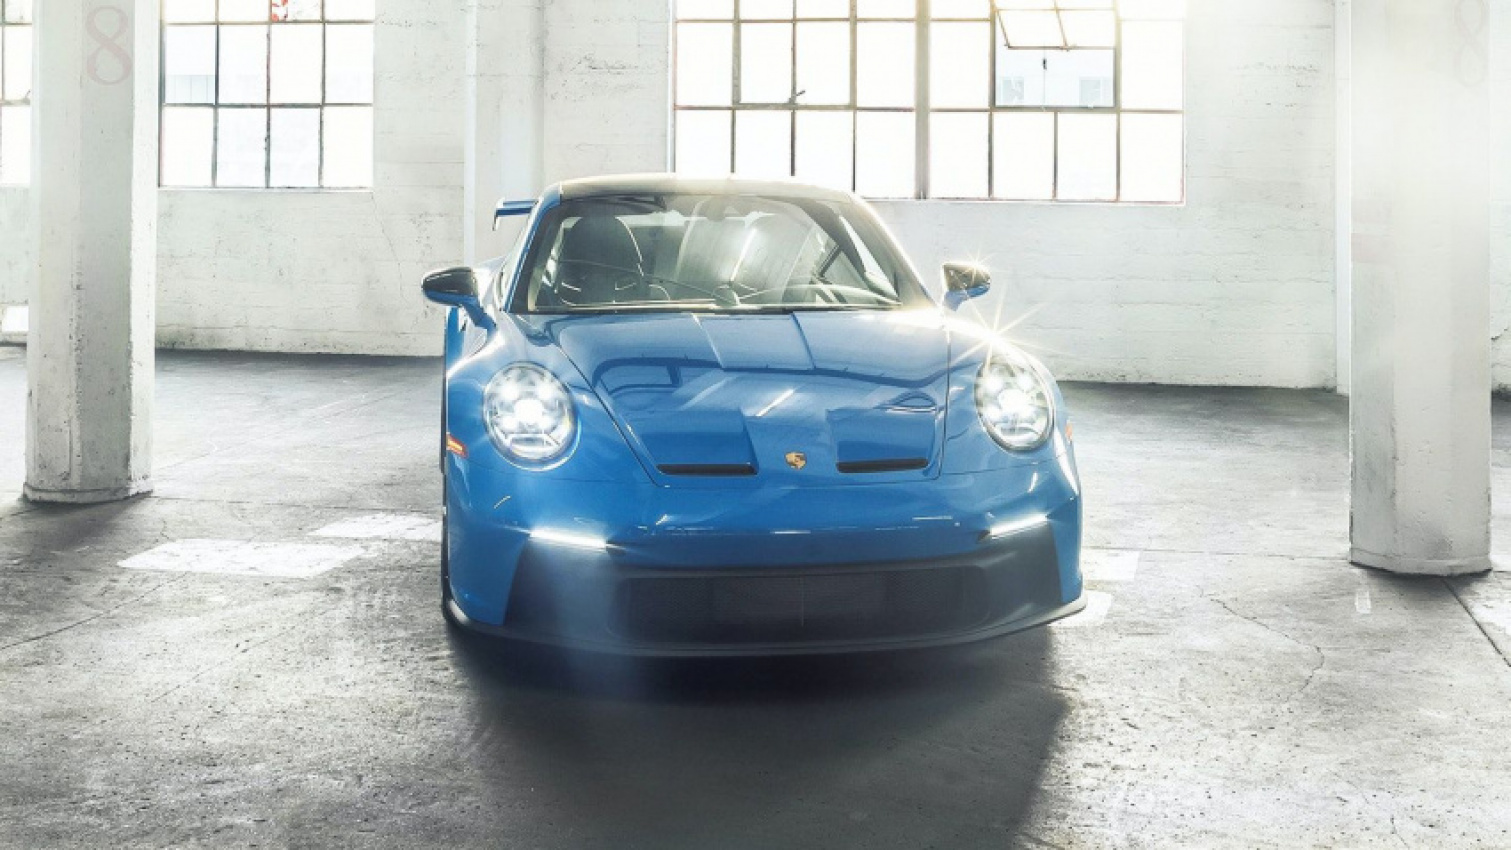 autos, cars, porsche, american, asian, celebrity, classic, client, europe, exotic, features, handpicked, luxury, modern classic, muscle, news, newsletter, off-road, sports, trucks, roll like patrick dempsey when you win this 2022 porsche 911 gt3